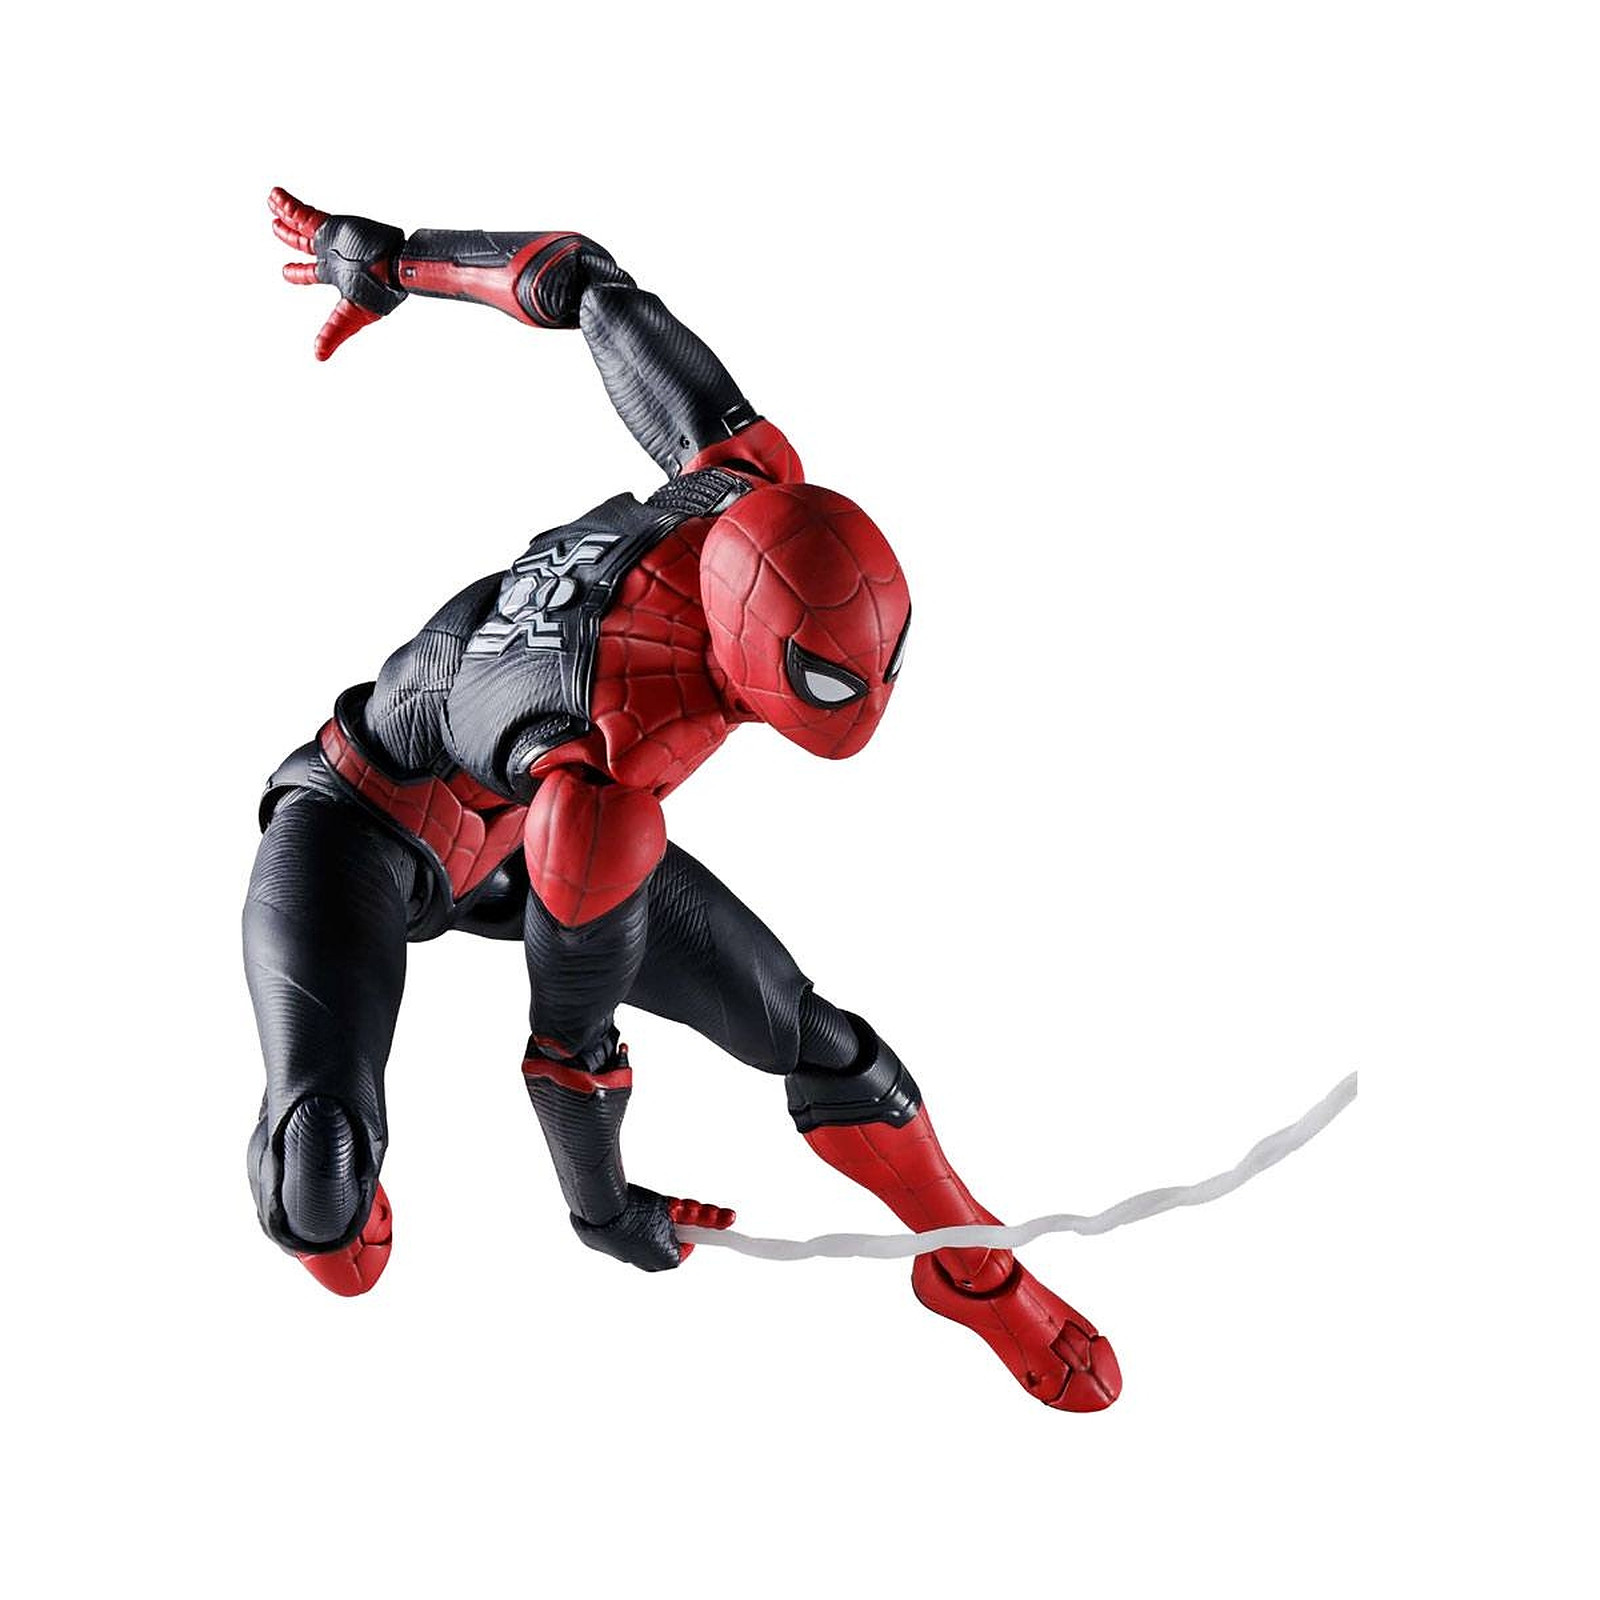 Spider-Man : No Way Home - Figurine S.H. Figuarts Upgraded Suit (Special Set) 15 cm - Figurines Bandai